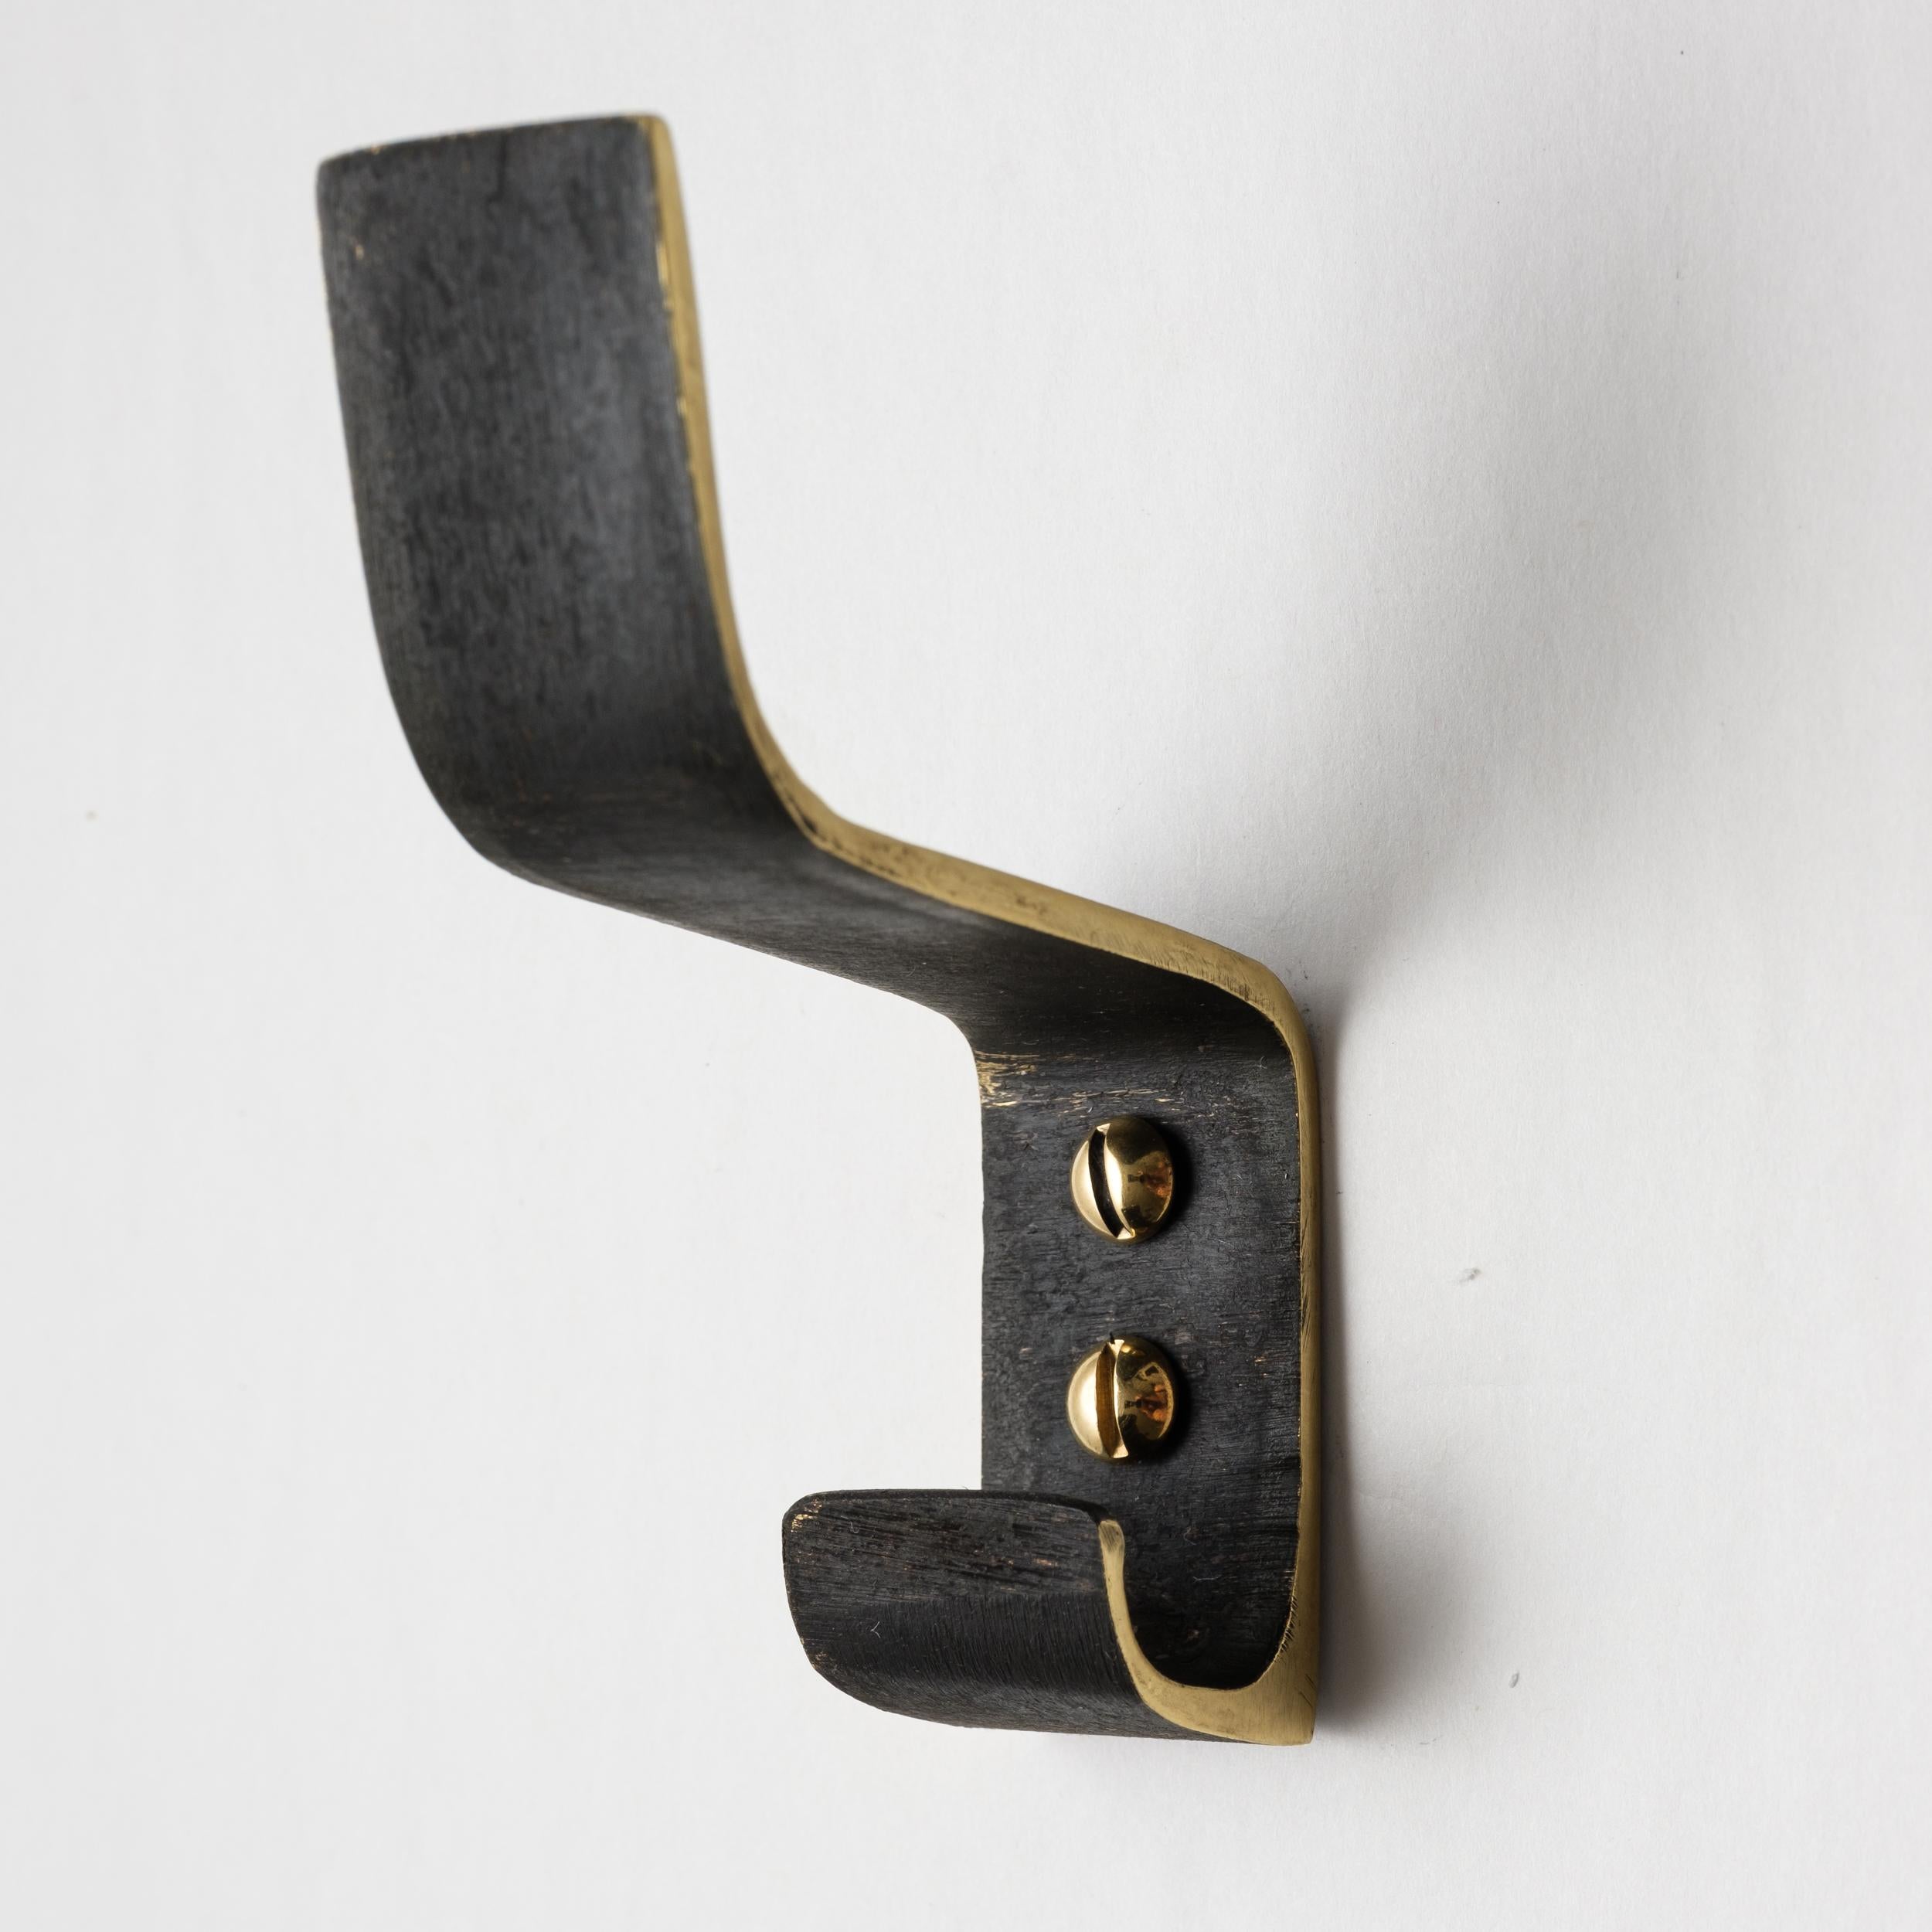 Carl Auböck model #5261 patinated brass hook. Designed in the 1950s, this versatile and Minimalist Viennese hook is executed in patinated and polished brass by Werkstätte Carl Auböck, Austria. 

Produced by Carl Auböck IV in the original Auböck